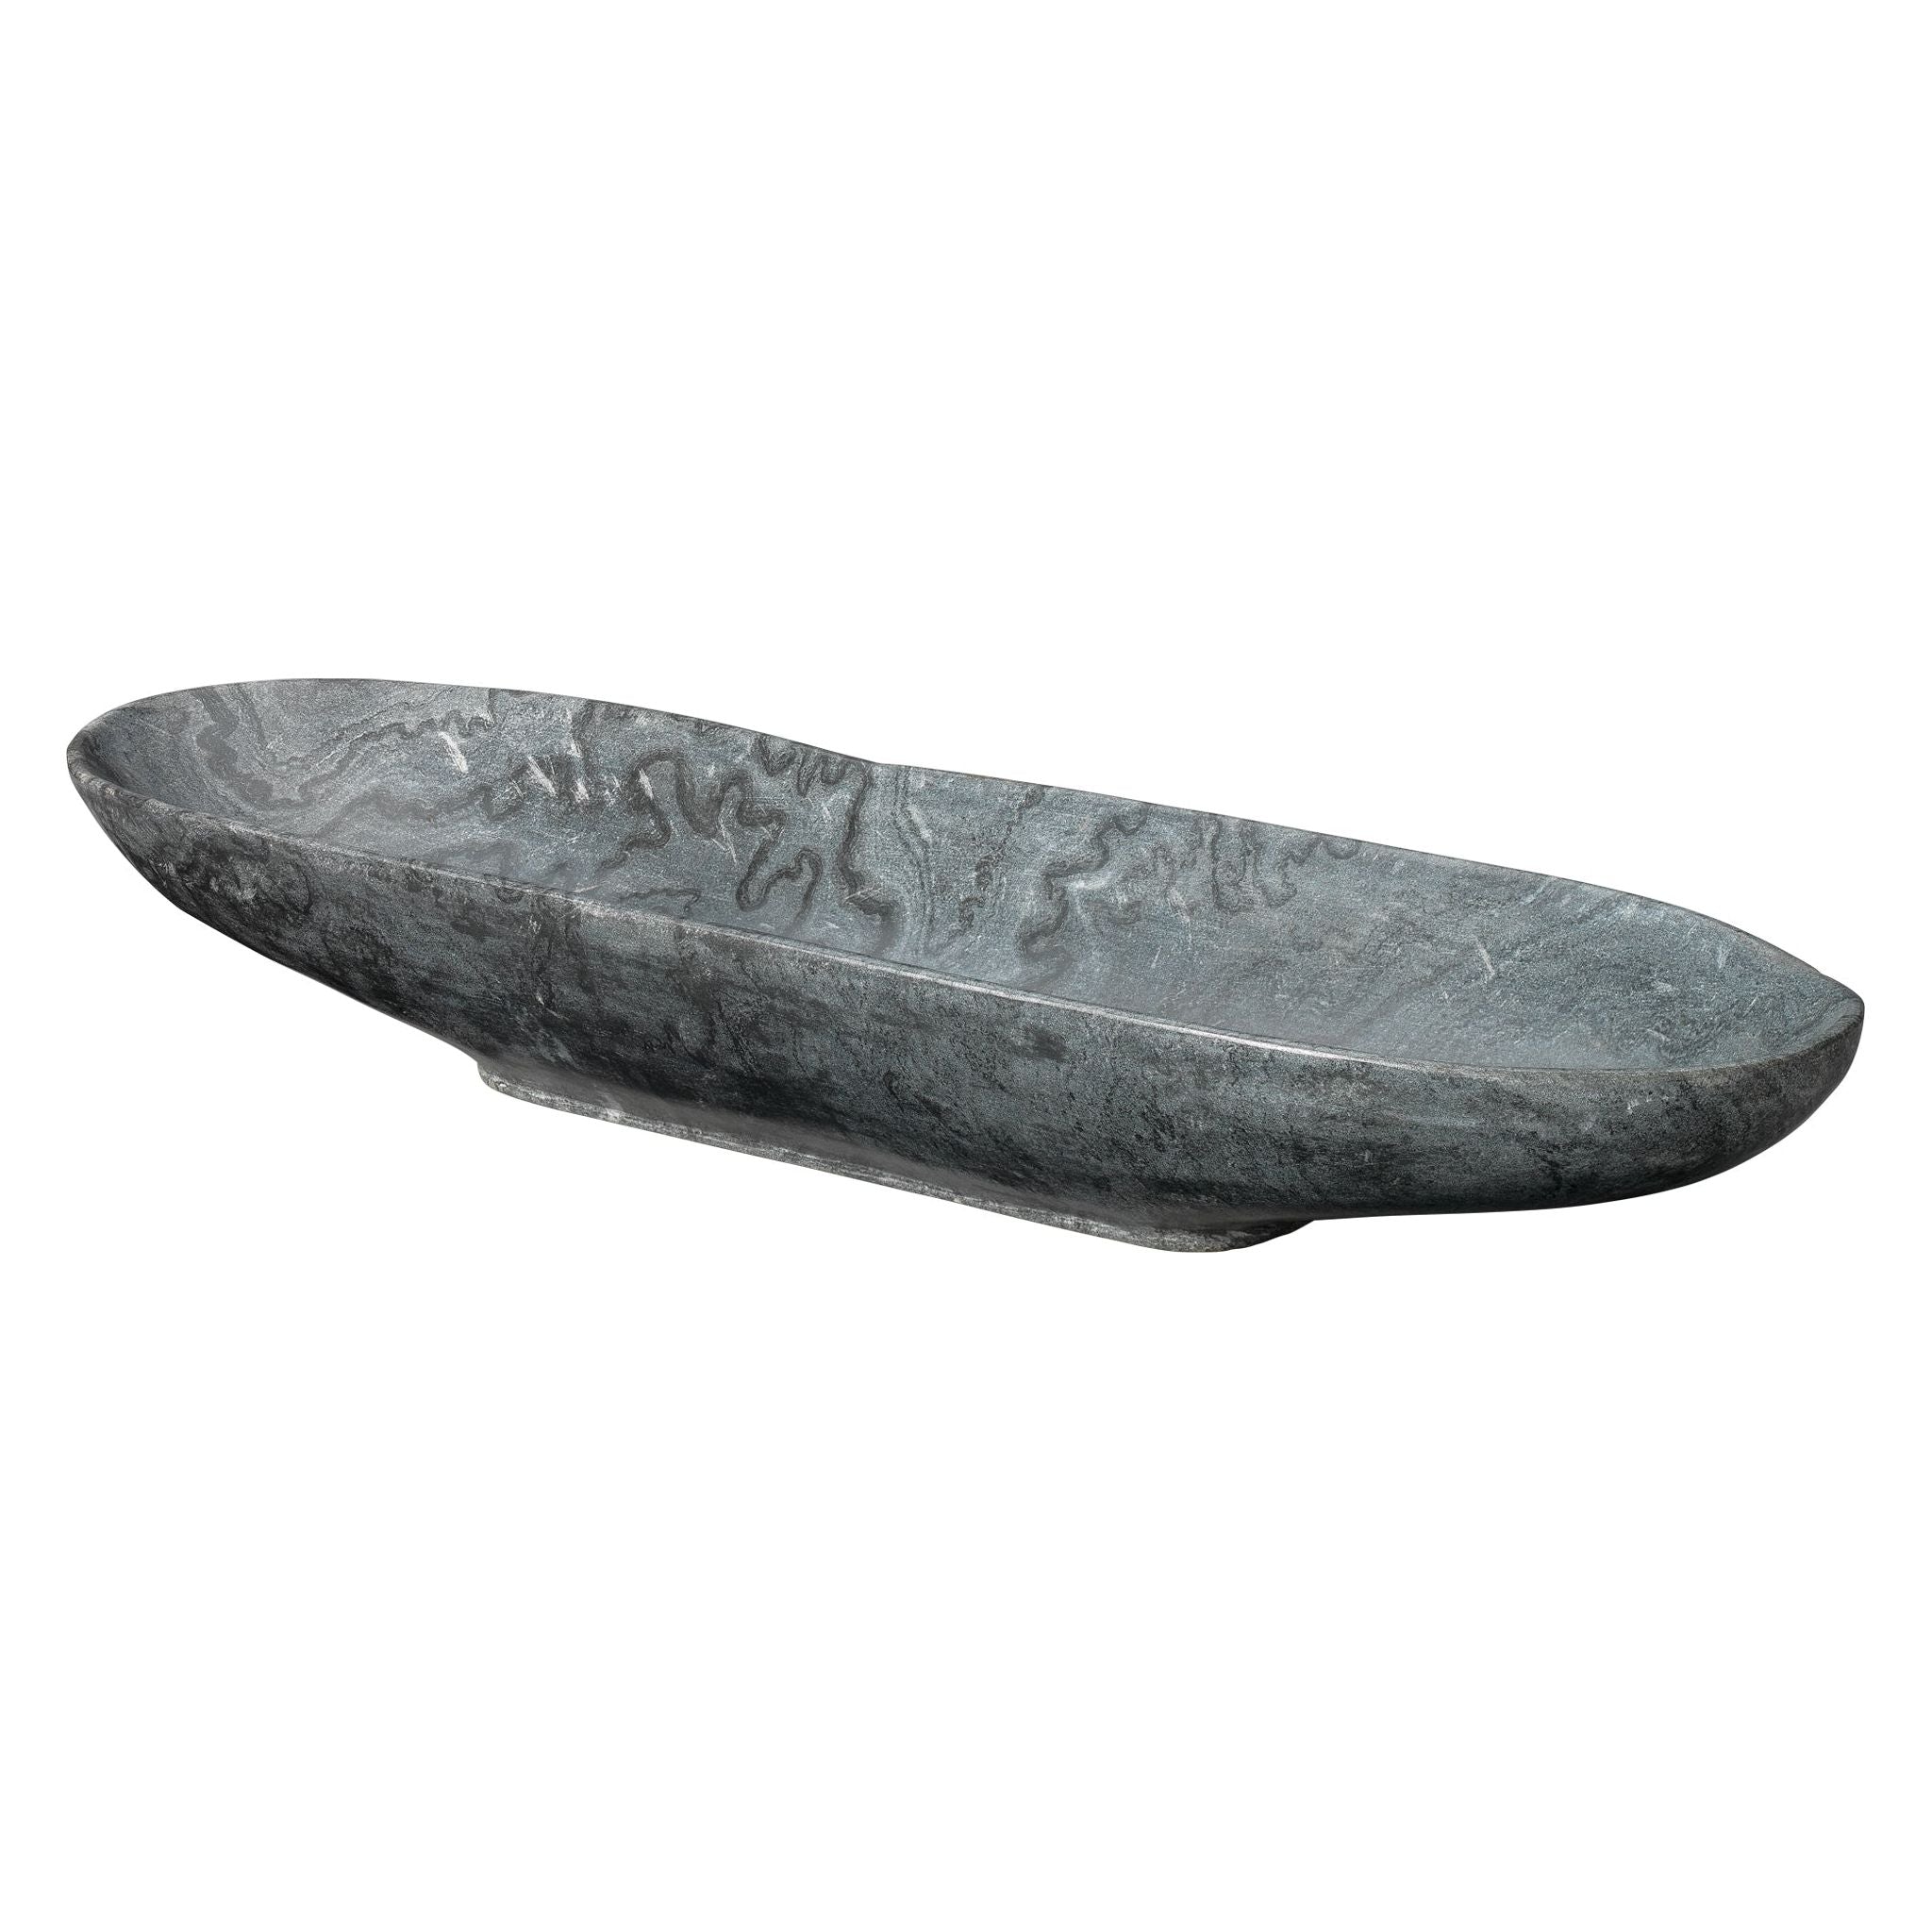 Jamie Young Company - 7LONG-BOGR - Long Oval Marble Bowl - Long - Grey